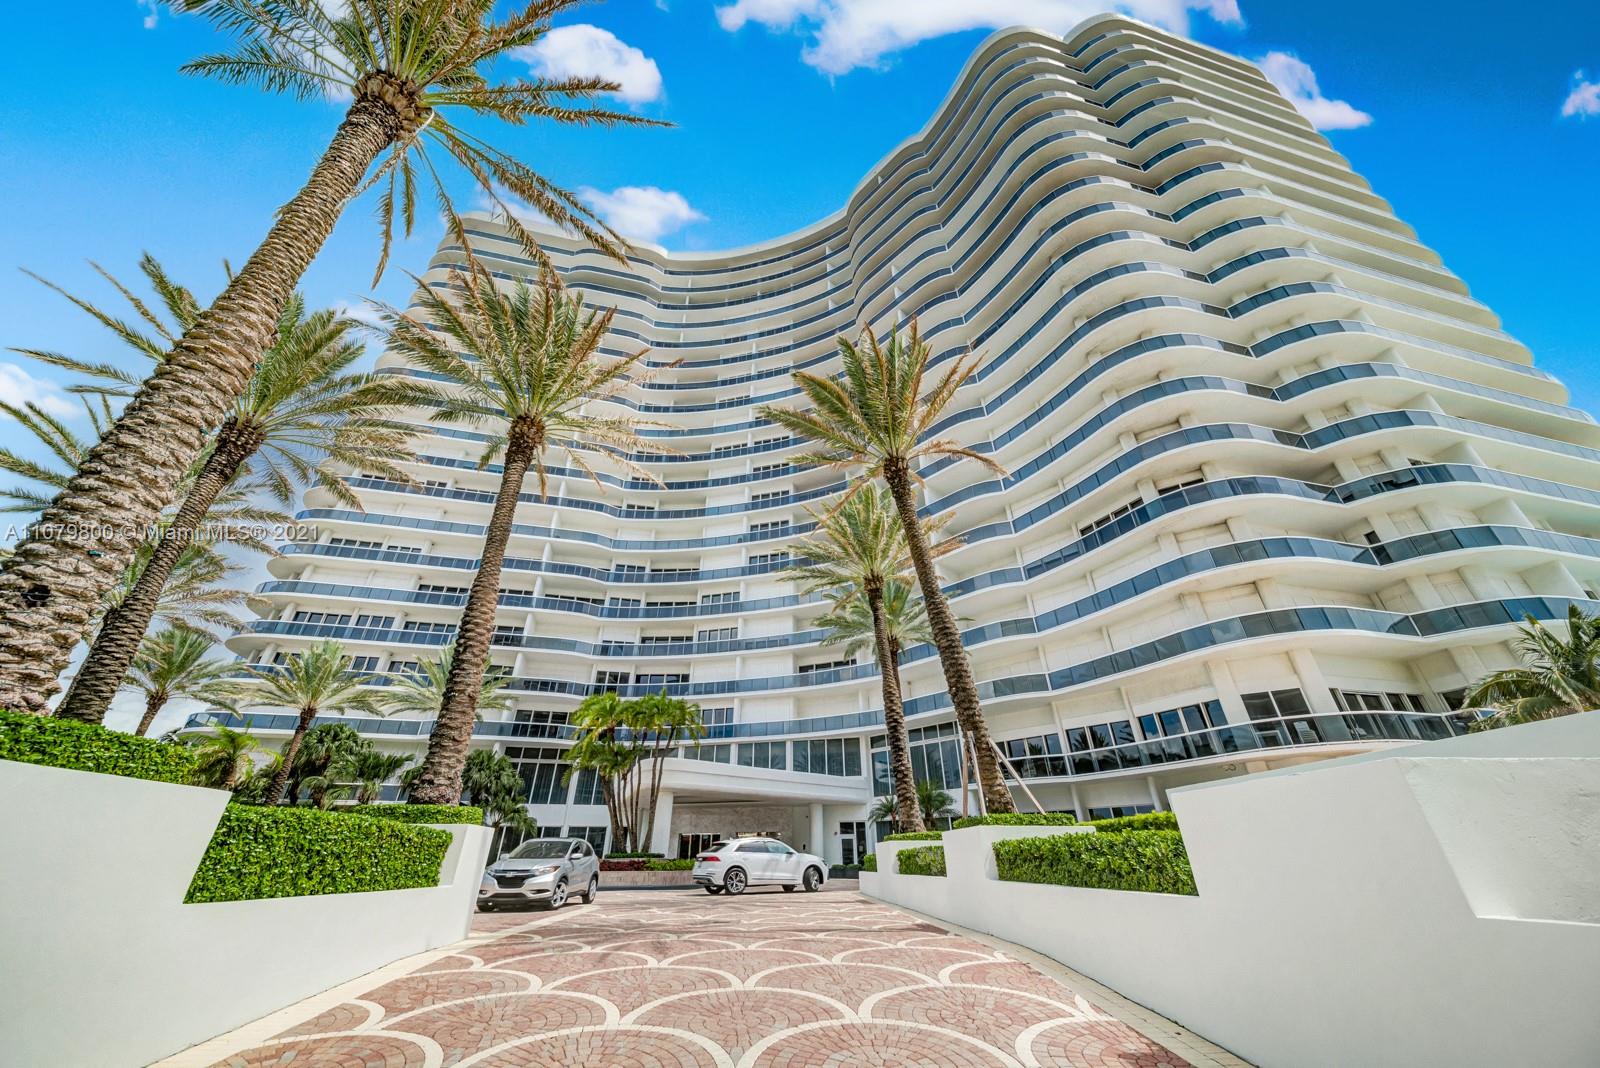 Stunning, bright and spectacular turn-key unit at Majestic Towers in Bal Harbour. Motivated seller! This condo has been completely renovated with white porcelain floors, Venetian plaster walls and top of the line Wolf kitchen appliances. Steam shower bathrooms with unique designer backsplash and custom built walk-in closets. This full service, private elevator building has exceptional services and amenities which include: fitness center, spa, pool, beach services, tennis courts, restaurant, and security. The Majestic Tower is just across from the most exclusive Bal Harbor Shops and Restaurants.